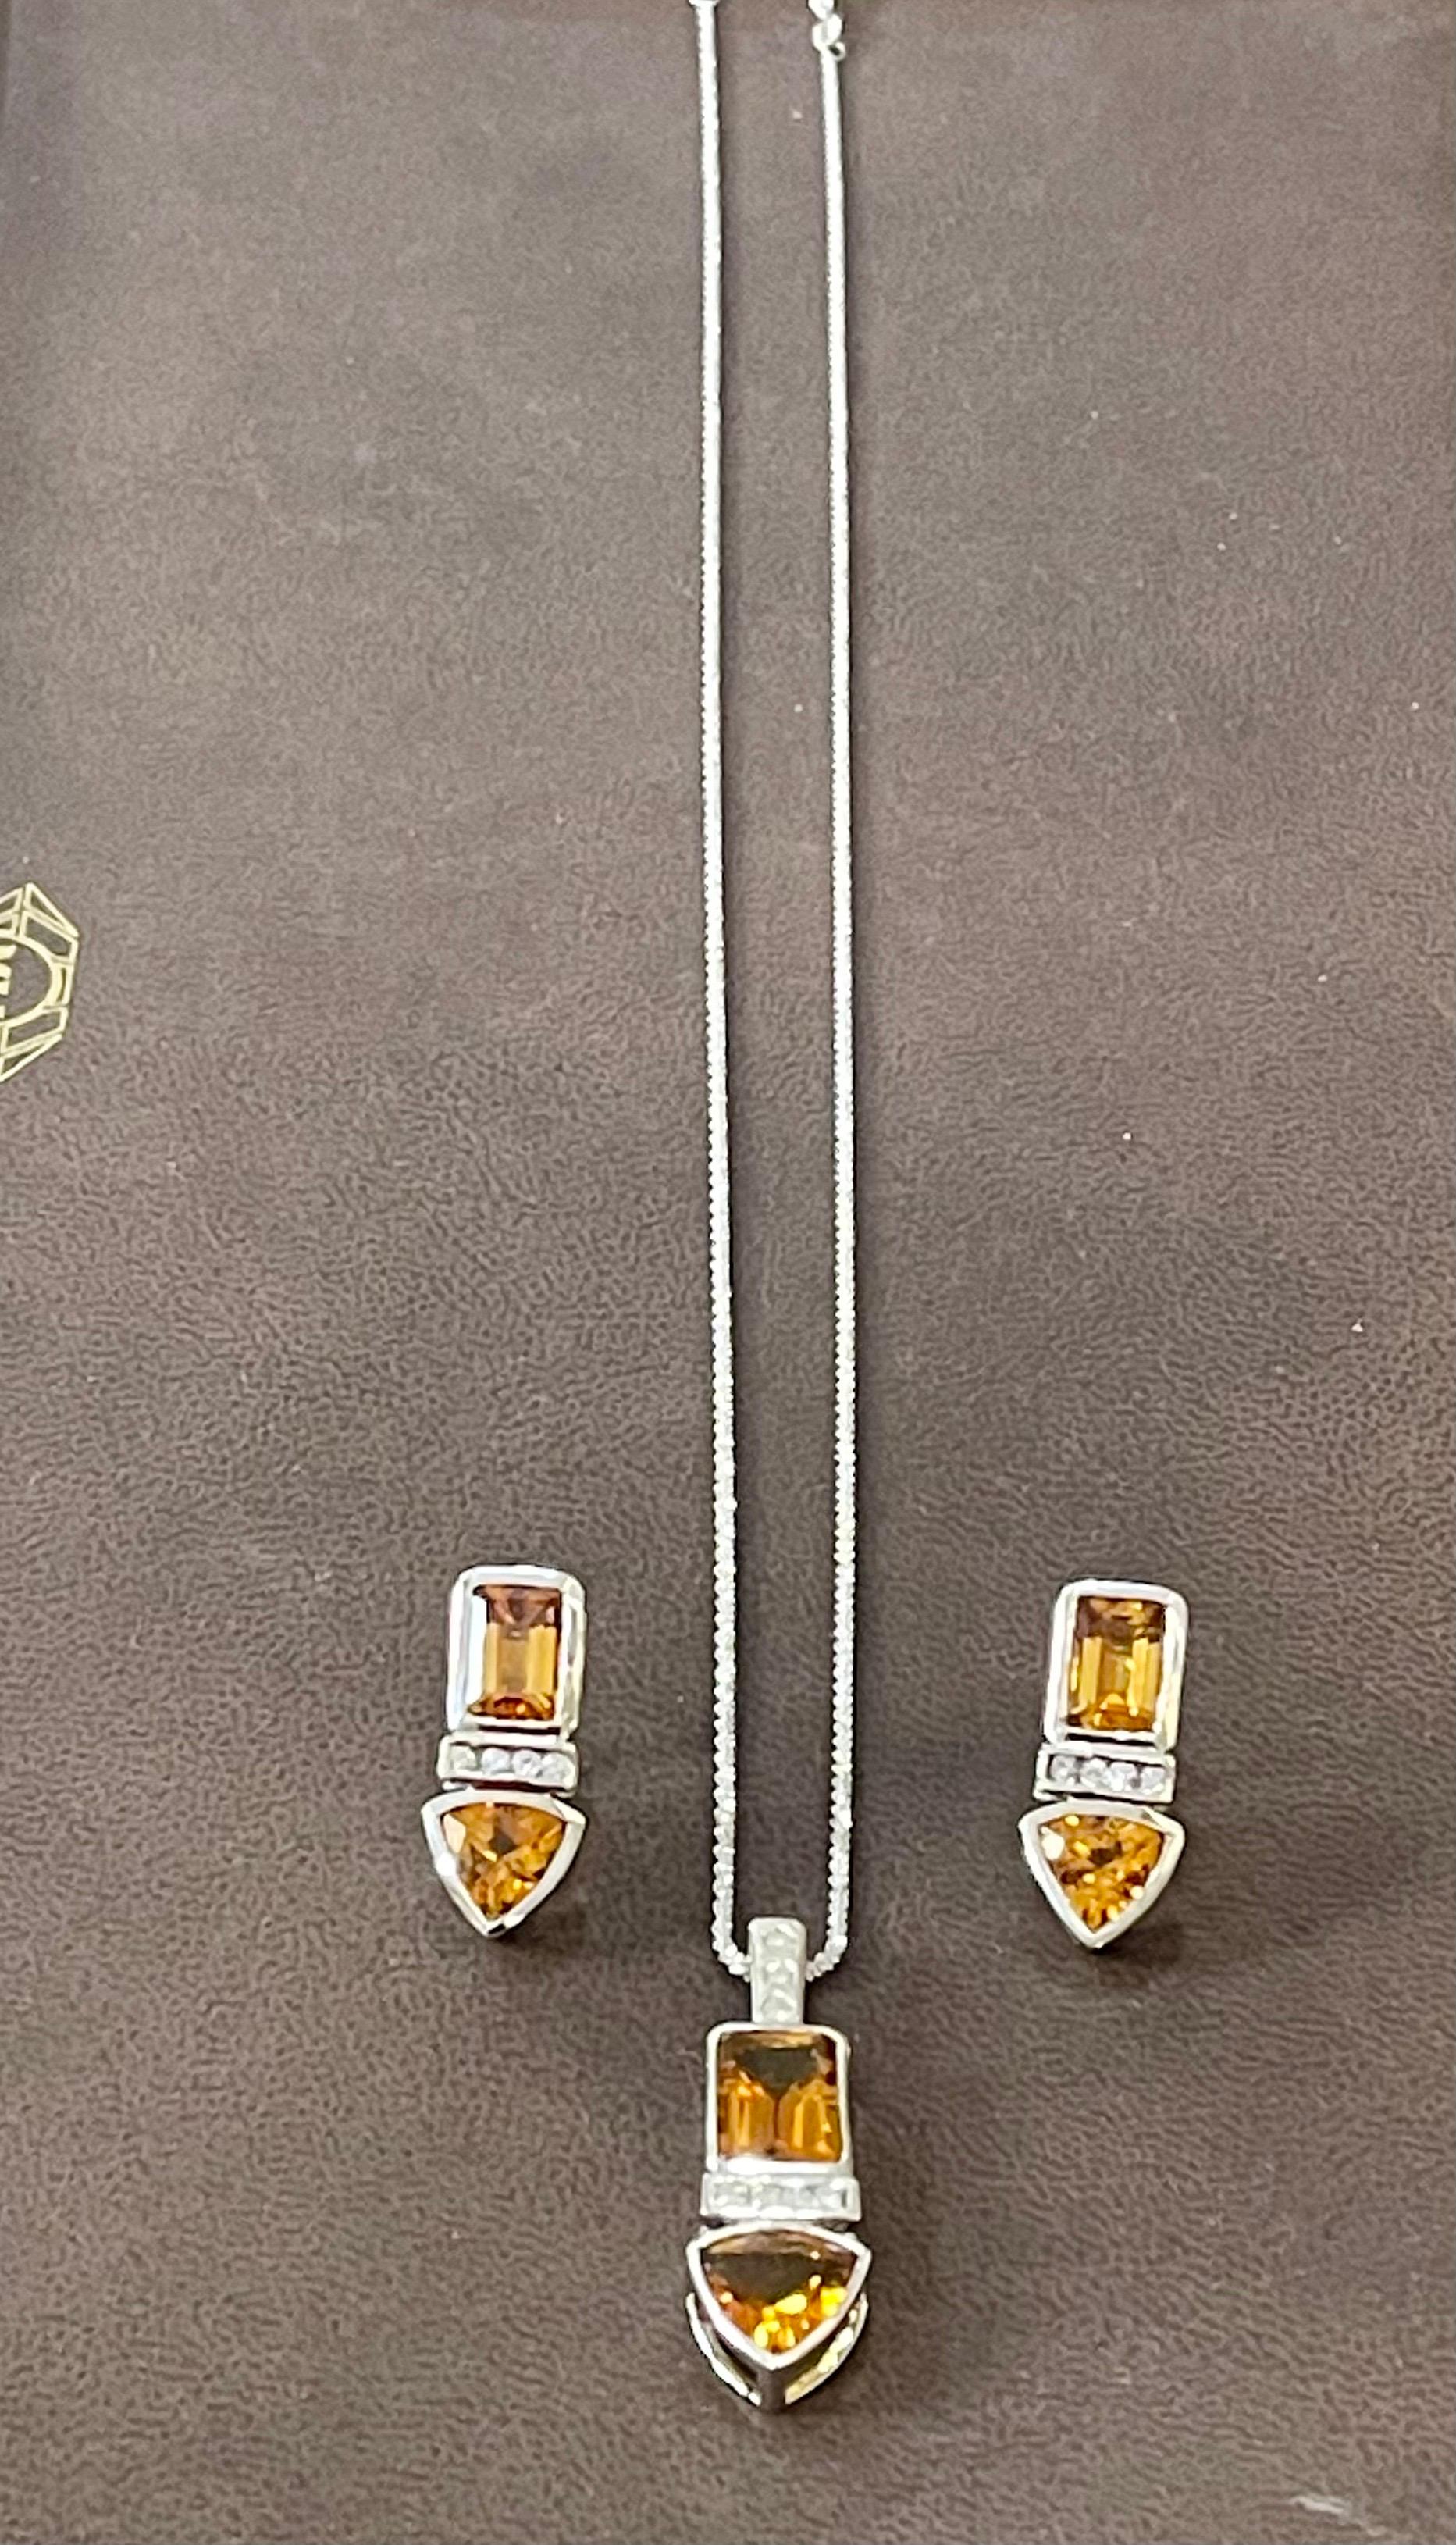 28 Carat Citrine & Diamond Pendant & Matching Earrings 14 Karat Gold Chain Set In Excellent Condition For Sale In New York, NY